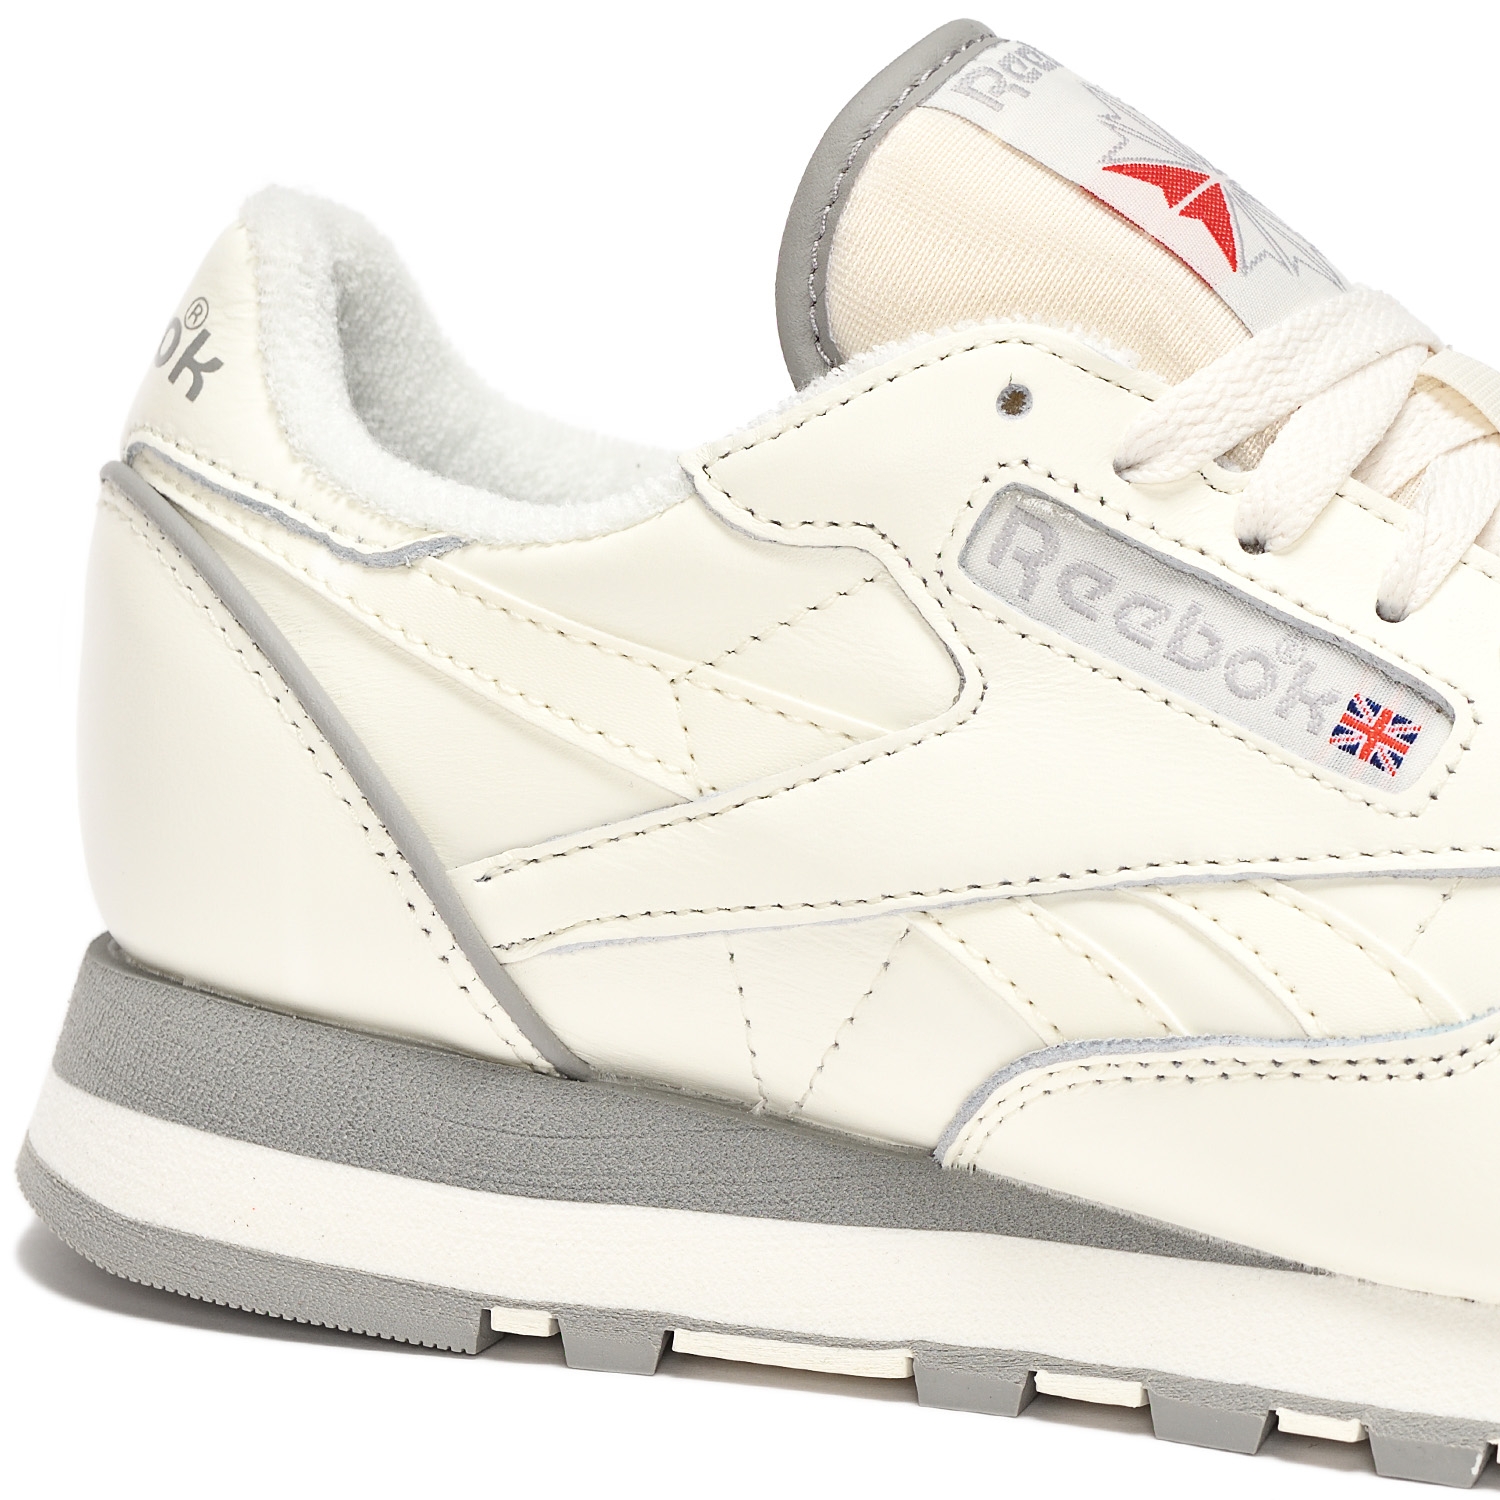 Reebok Classic Leather 1983 Vintage Chalk / Vector Red